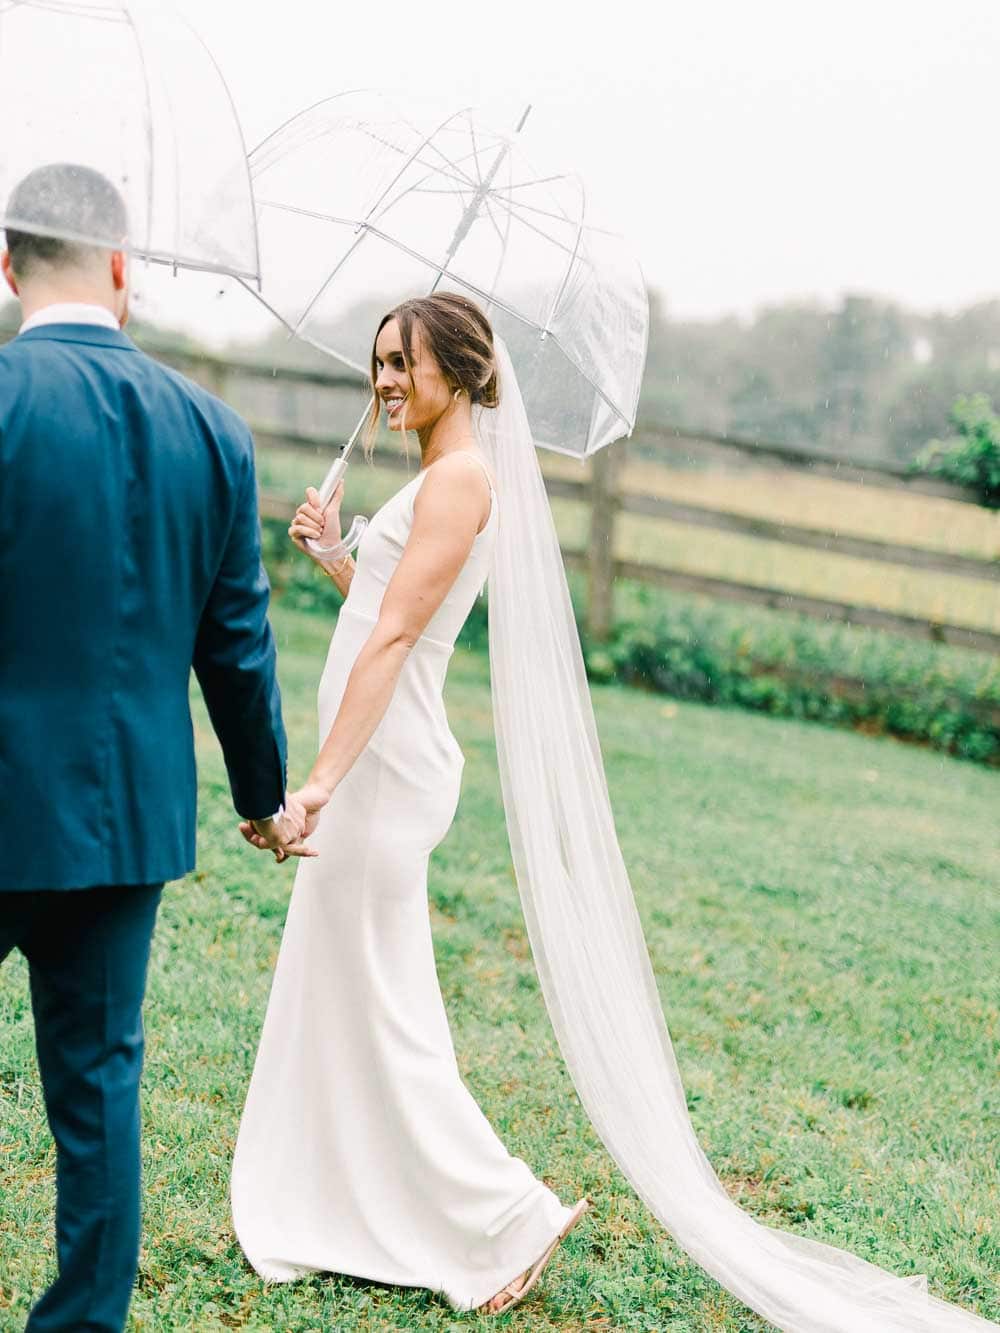 rainy bride and groom portrait during their intimate backyard wedding in cleveland Ohio